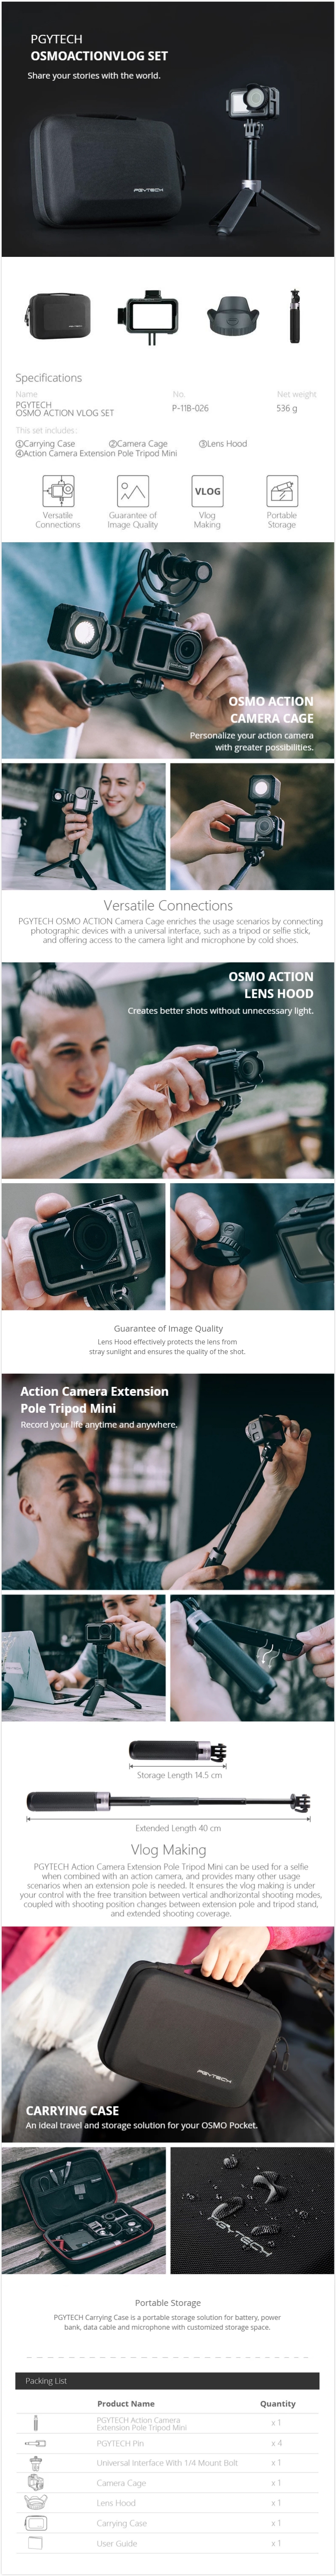 PGYTECH Action Camera VLOG Set Extension Pole Tripod Mini Carrying Case Camera Cage Lens Hood For DJI OSMO Action FPV Camera